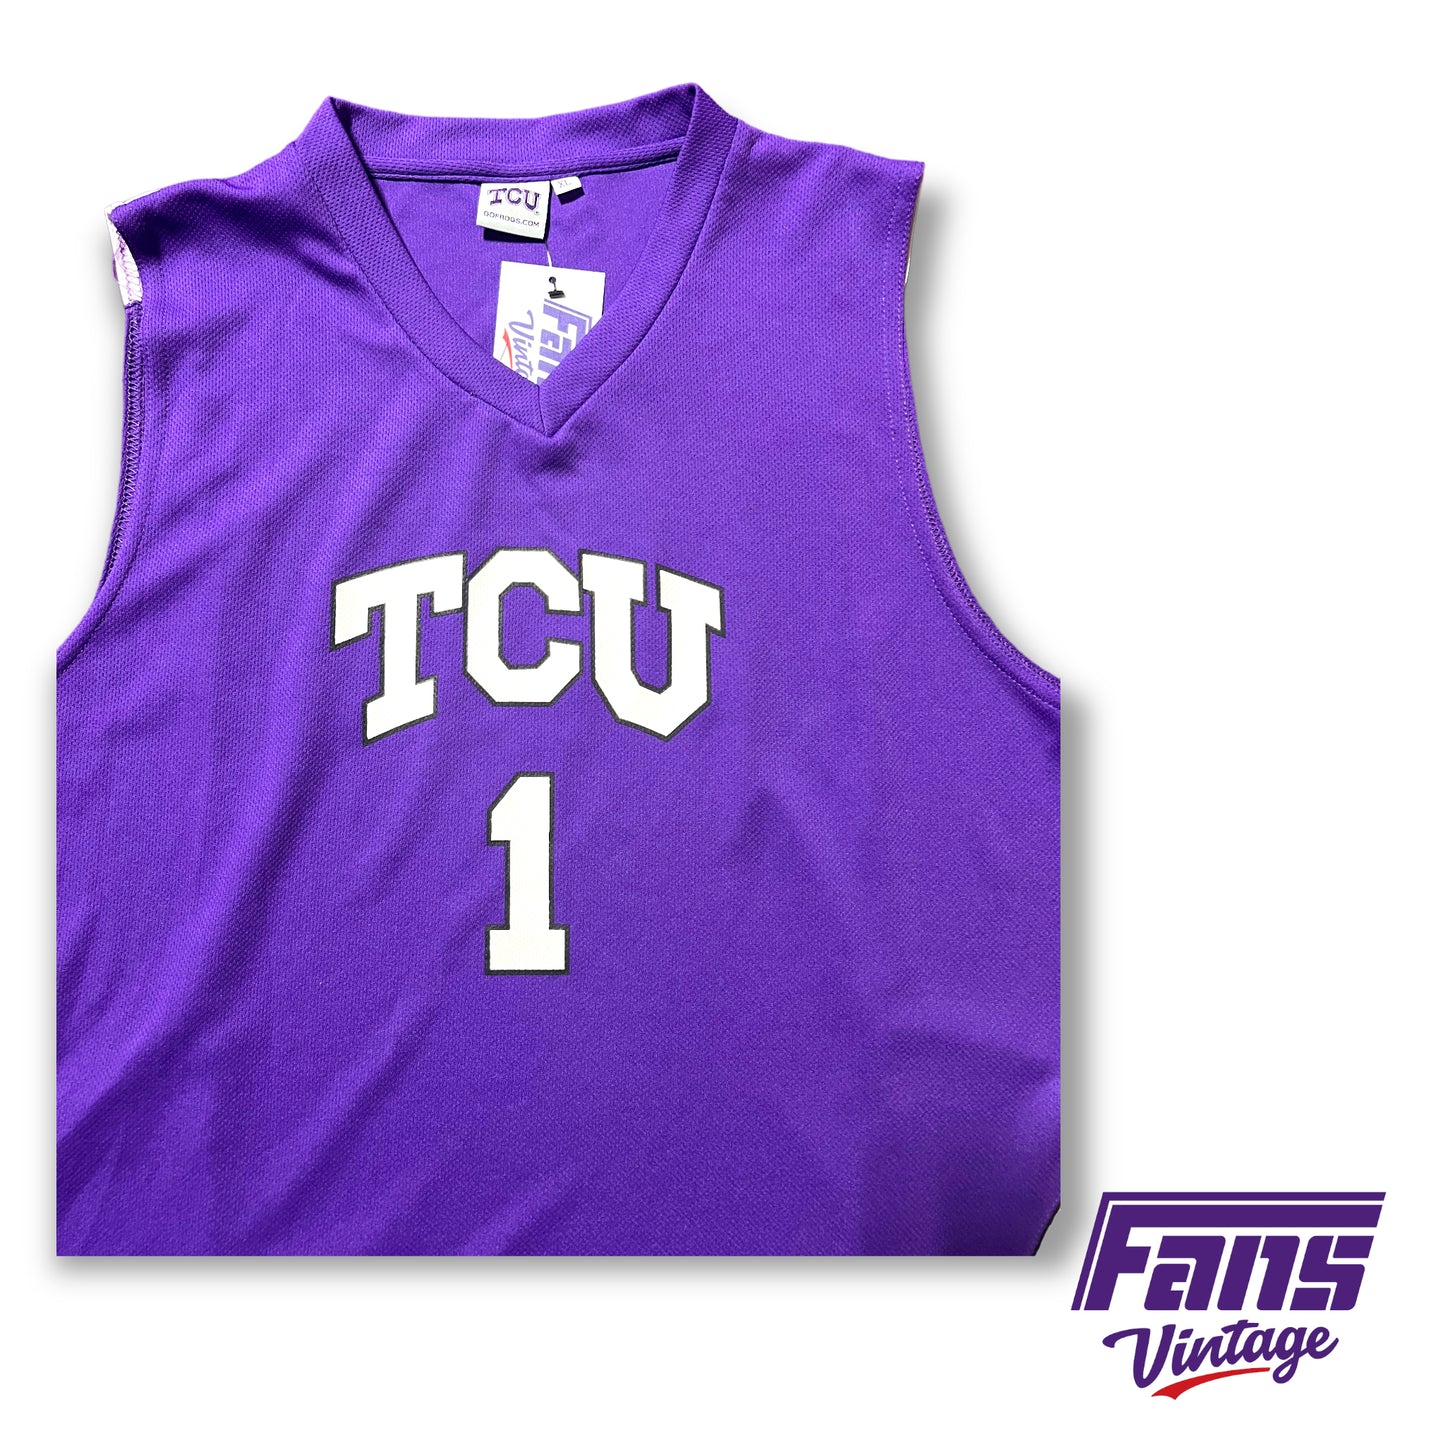 TCU Basketball Jersey with Color blocked Paneling